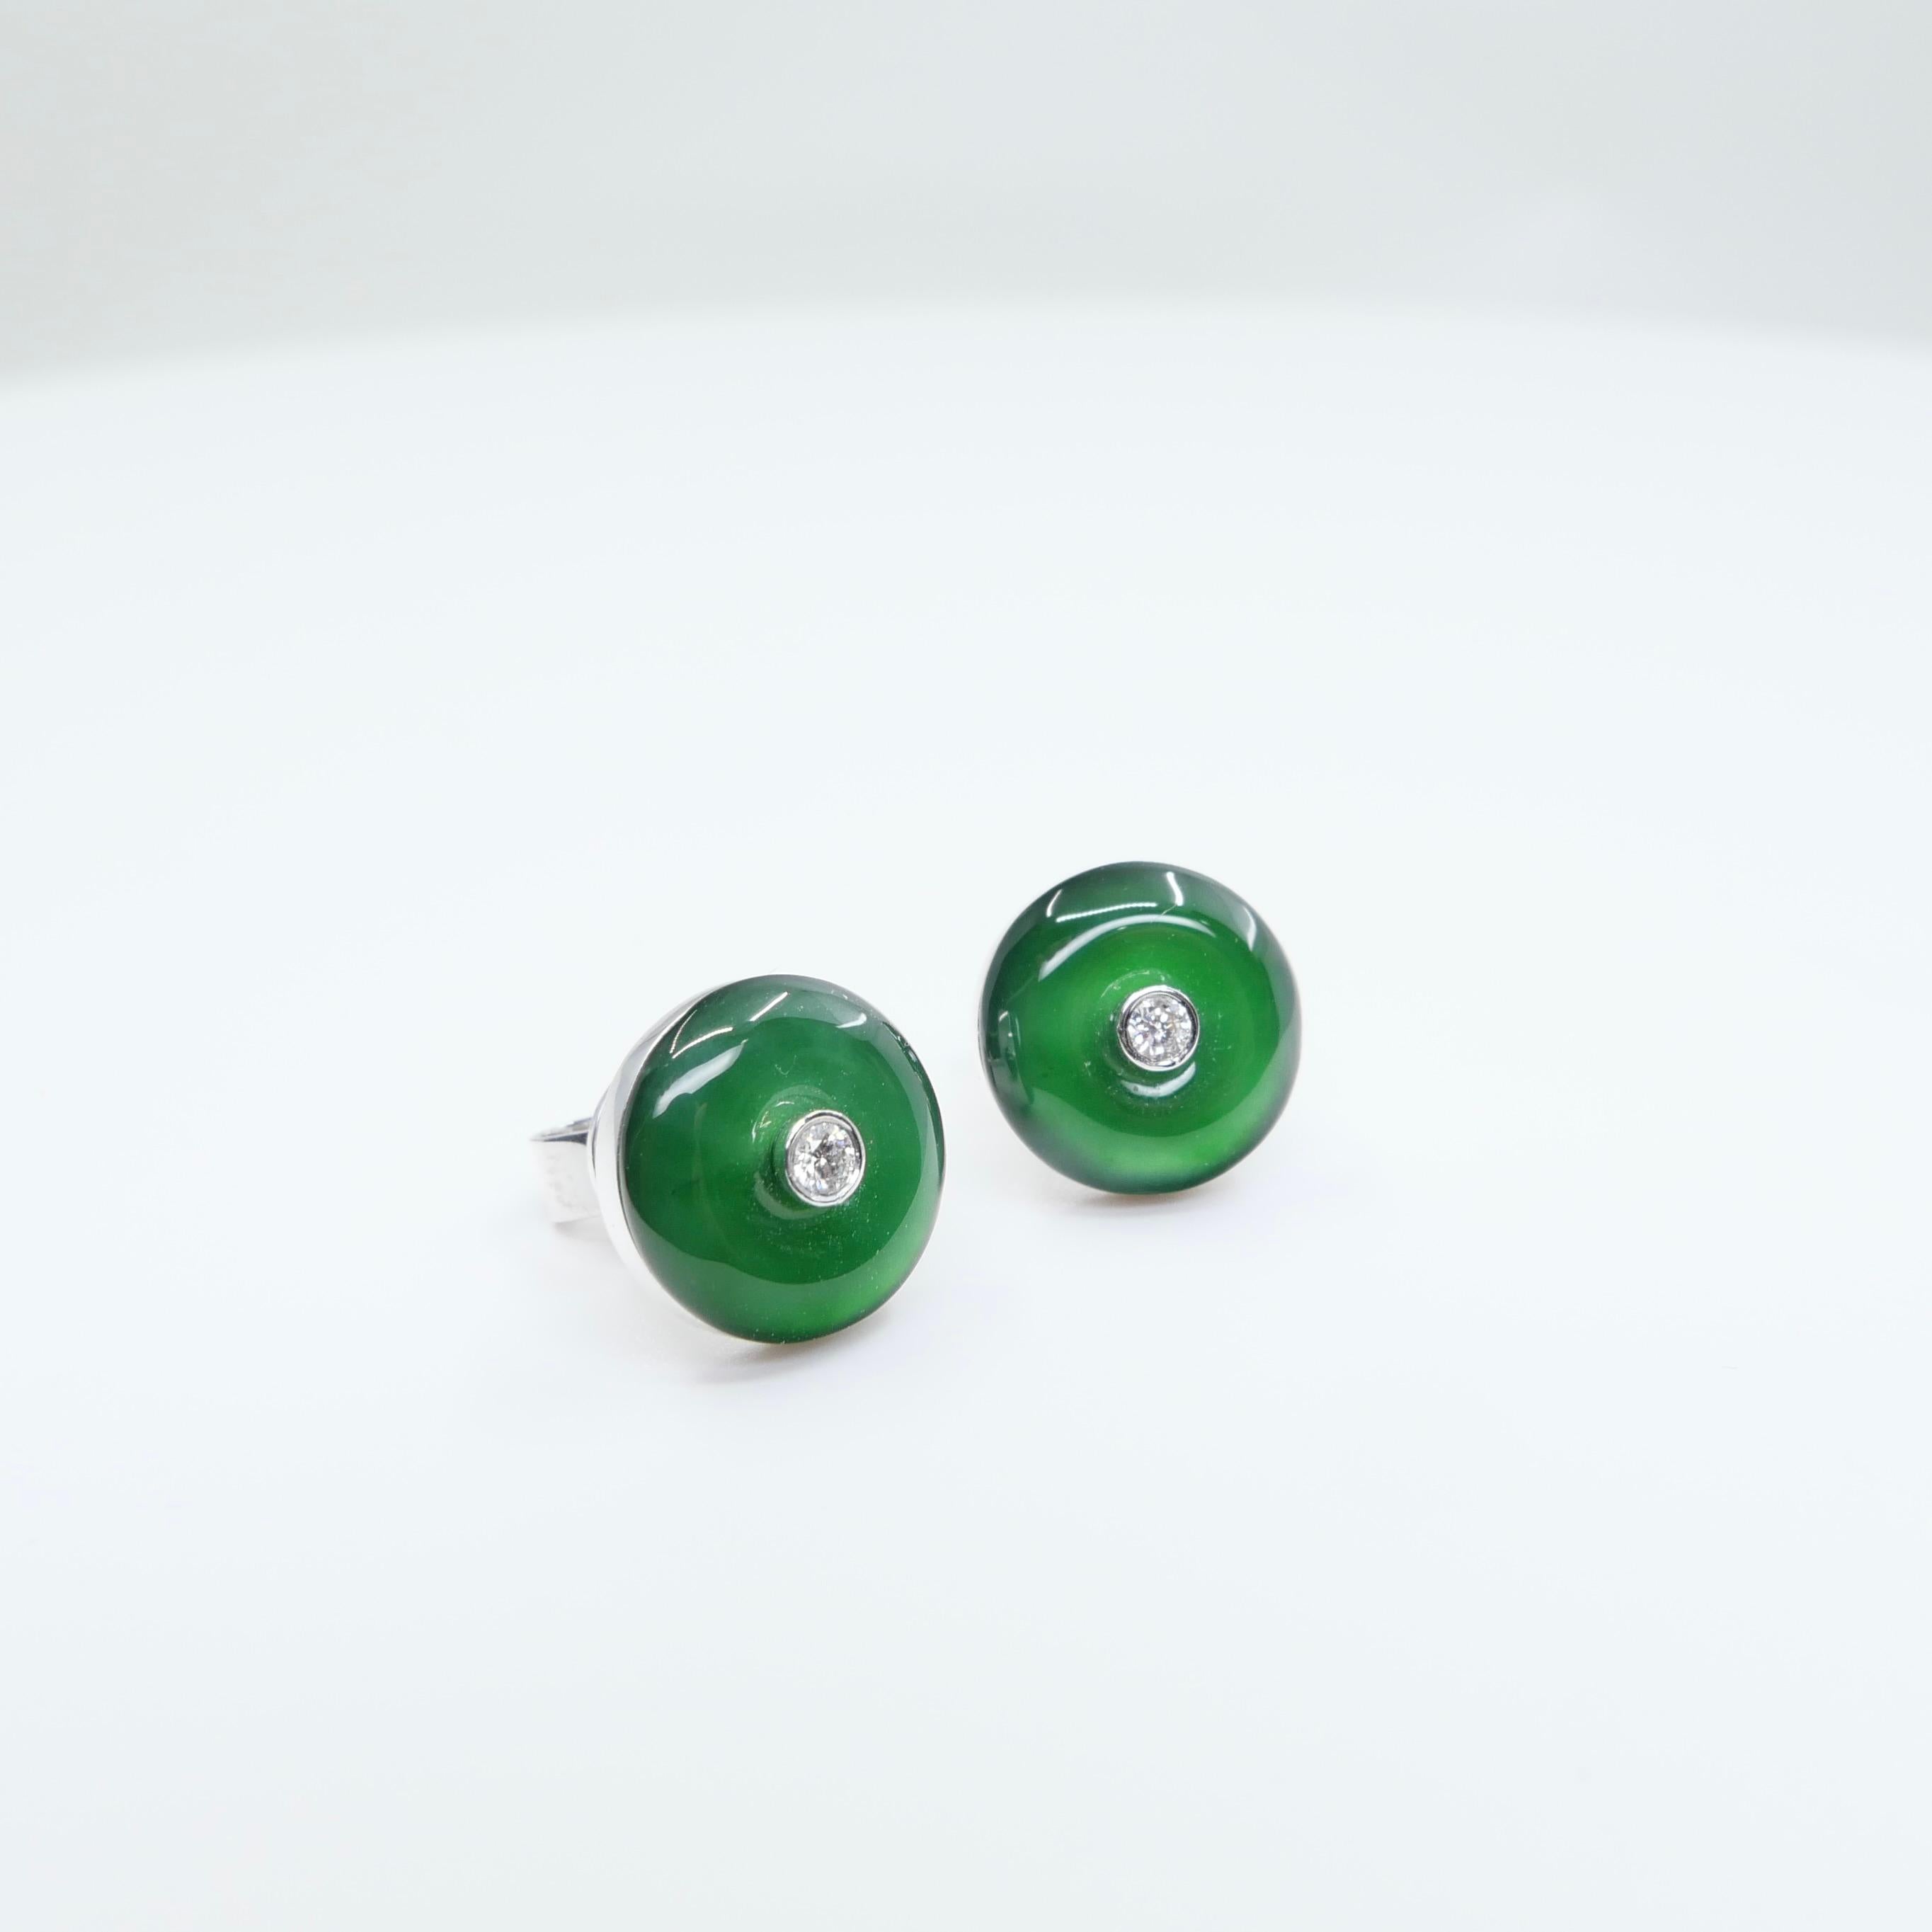 Certified Natural Type A Jadeite Jade And Diamond Earrings. Imperial Green Color For Sale 2